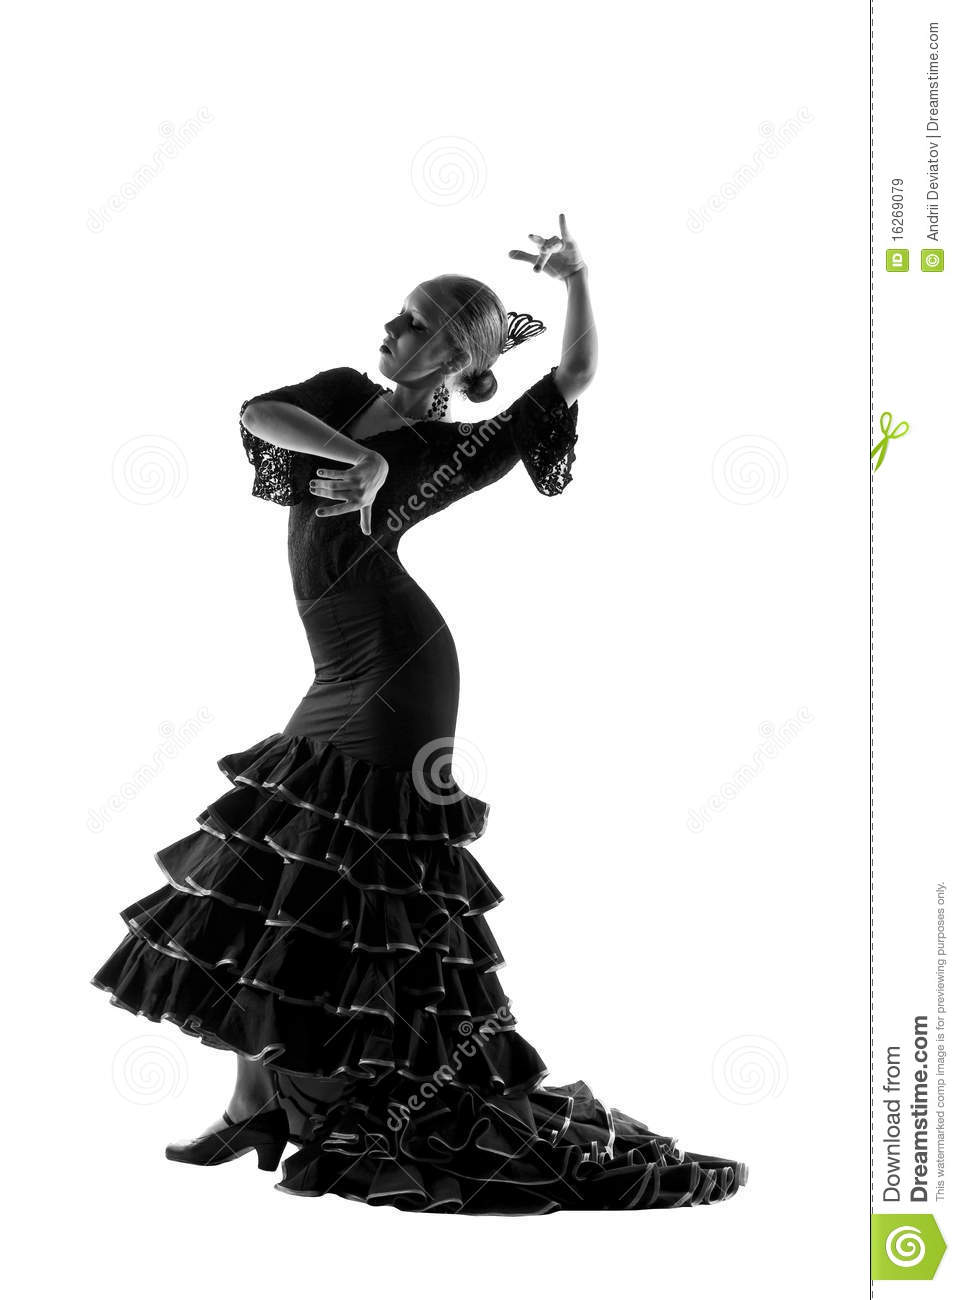 Flamenco Dancer Silhouette Royalty Free Stock Images   Image  16269079